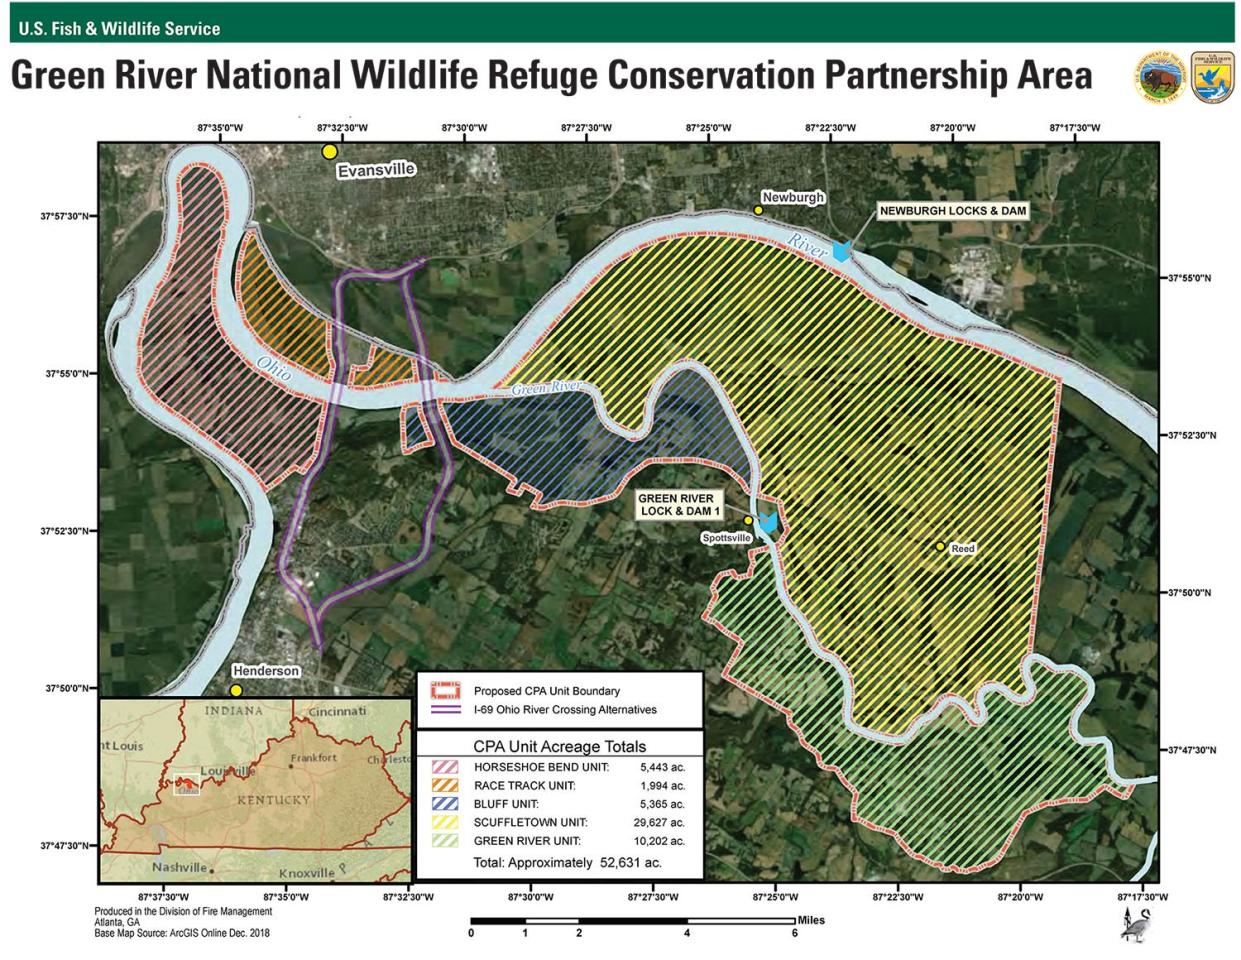 A map showing the areas of the Green River National Wildlife Refuge Conservation Partnership.